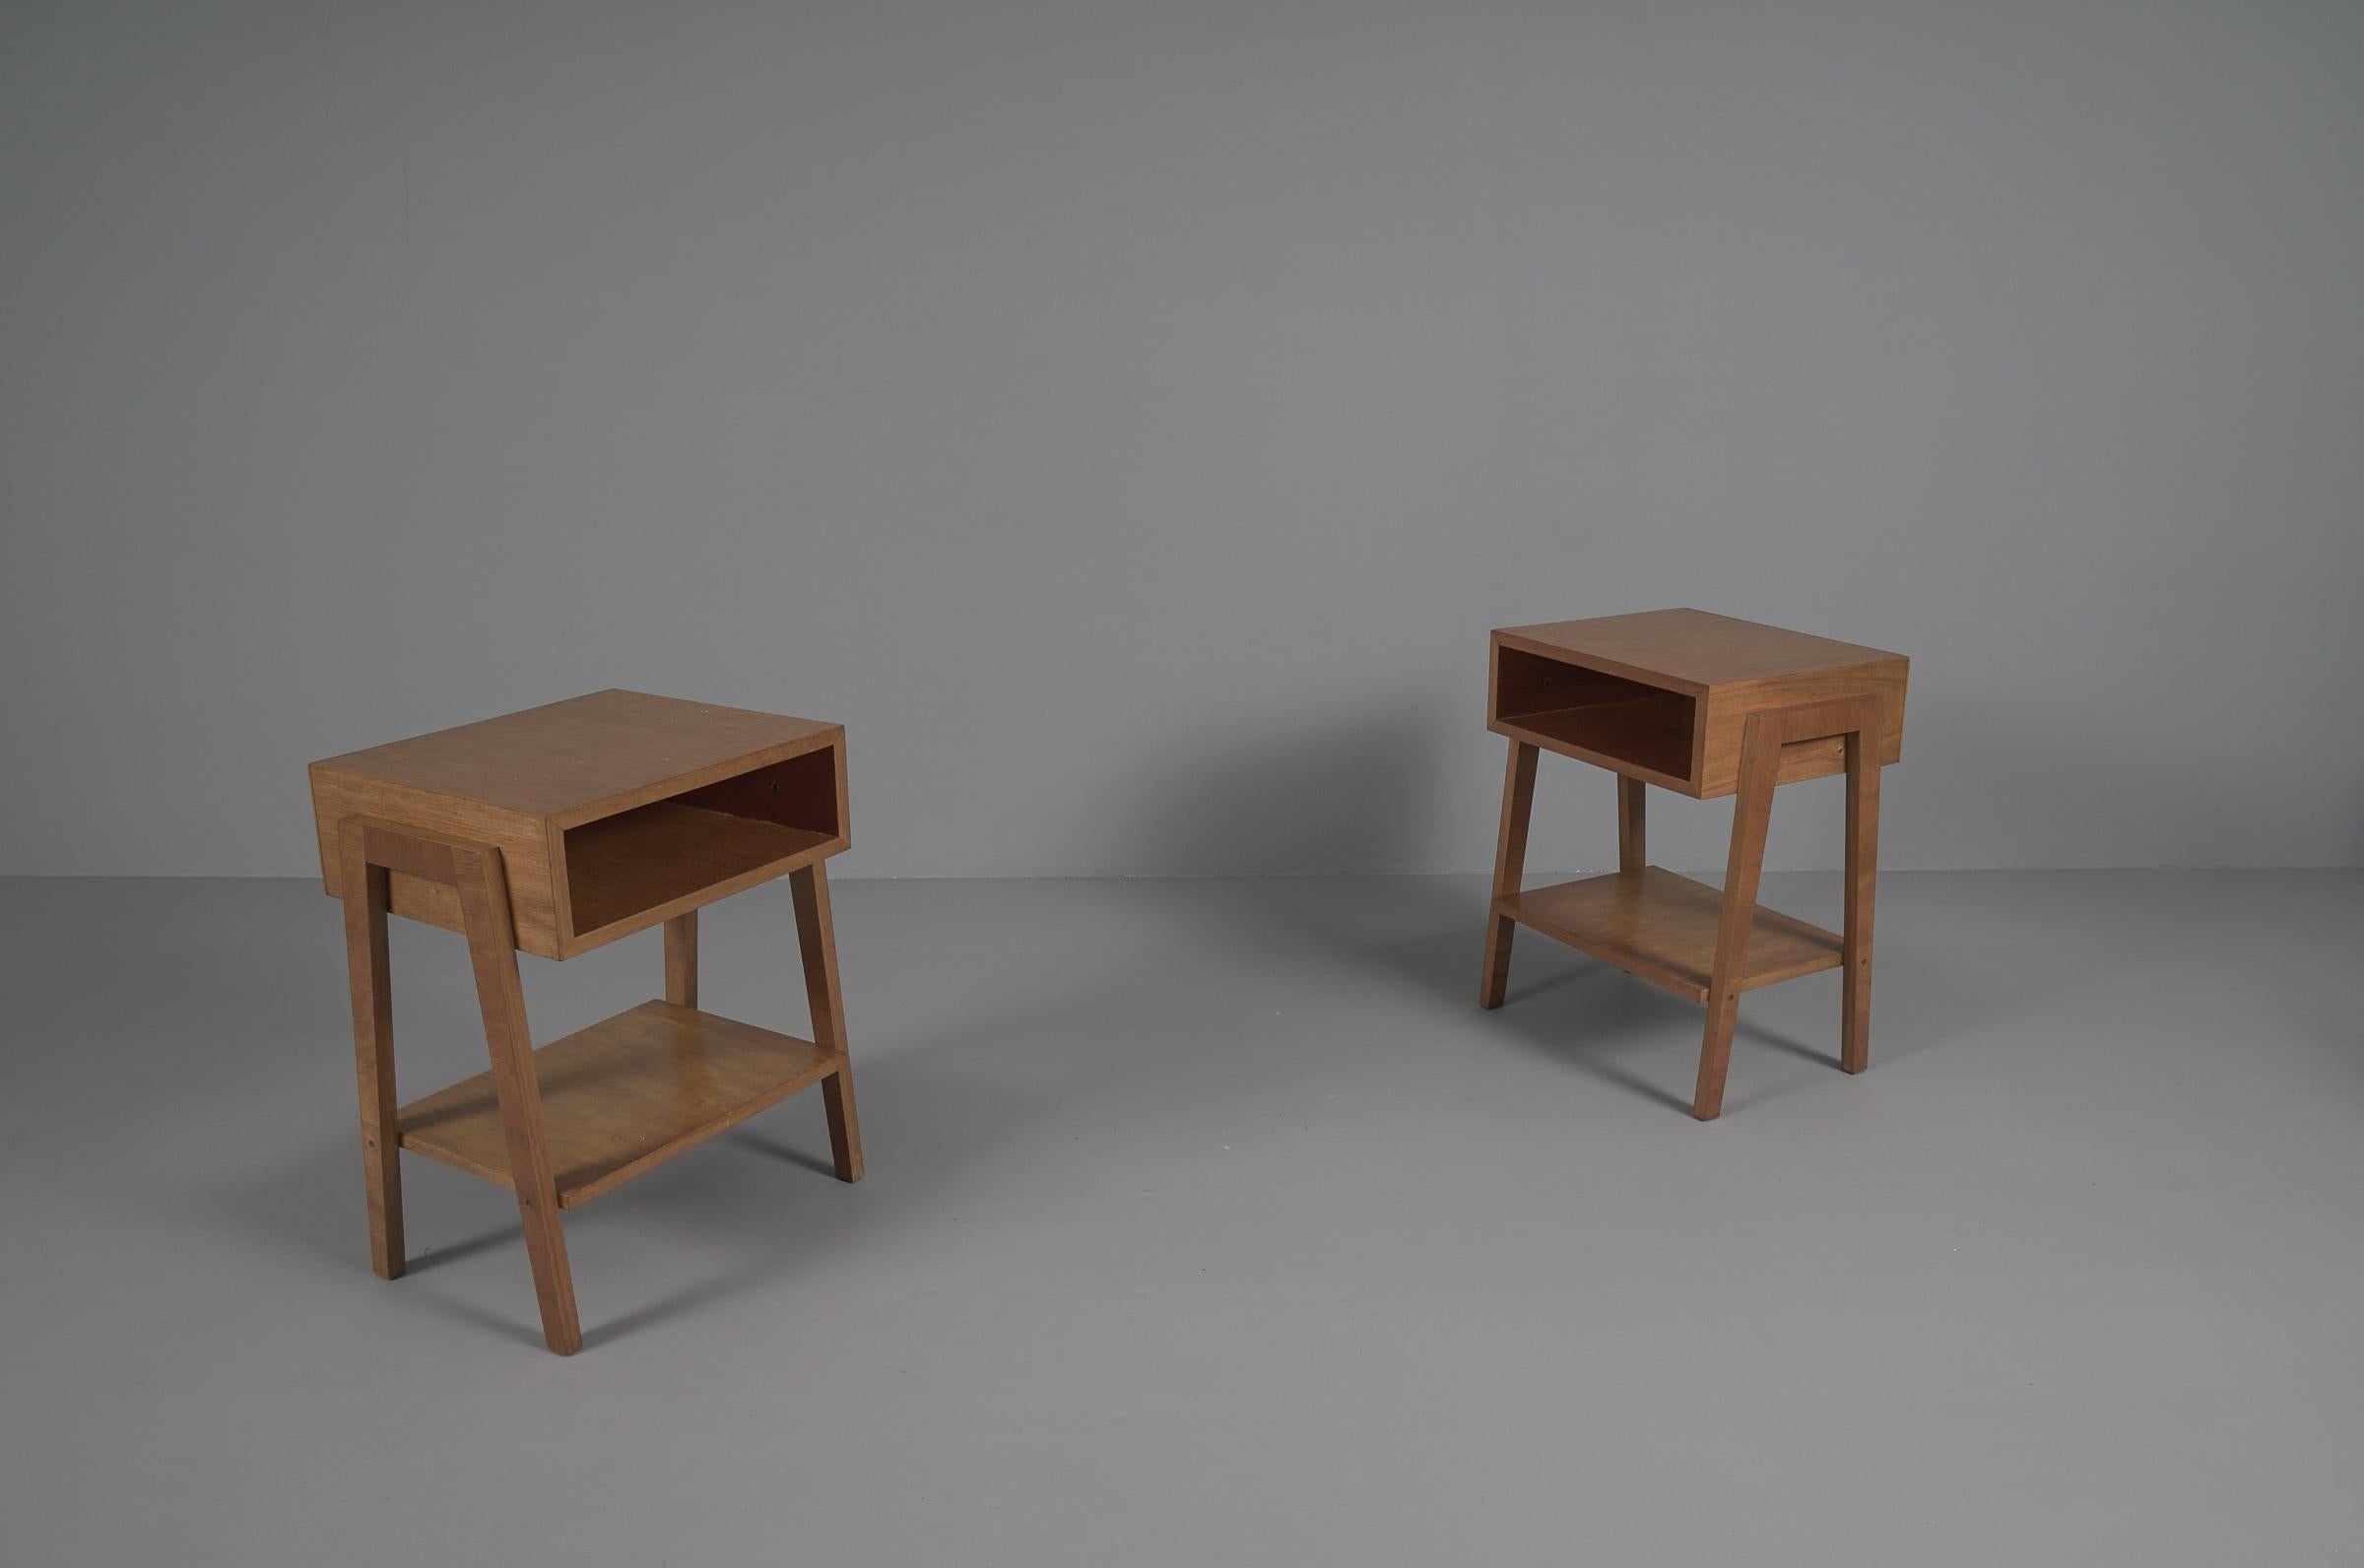 Mid-20th Century  Pair of Minimalistic Mid-Century Modern Wooden Nightstands, Italy 1950s For Sale